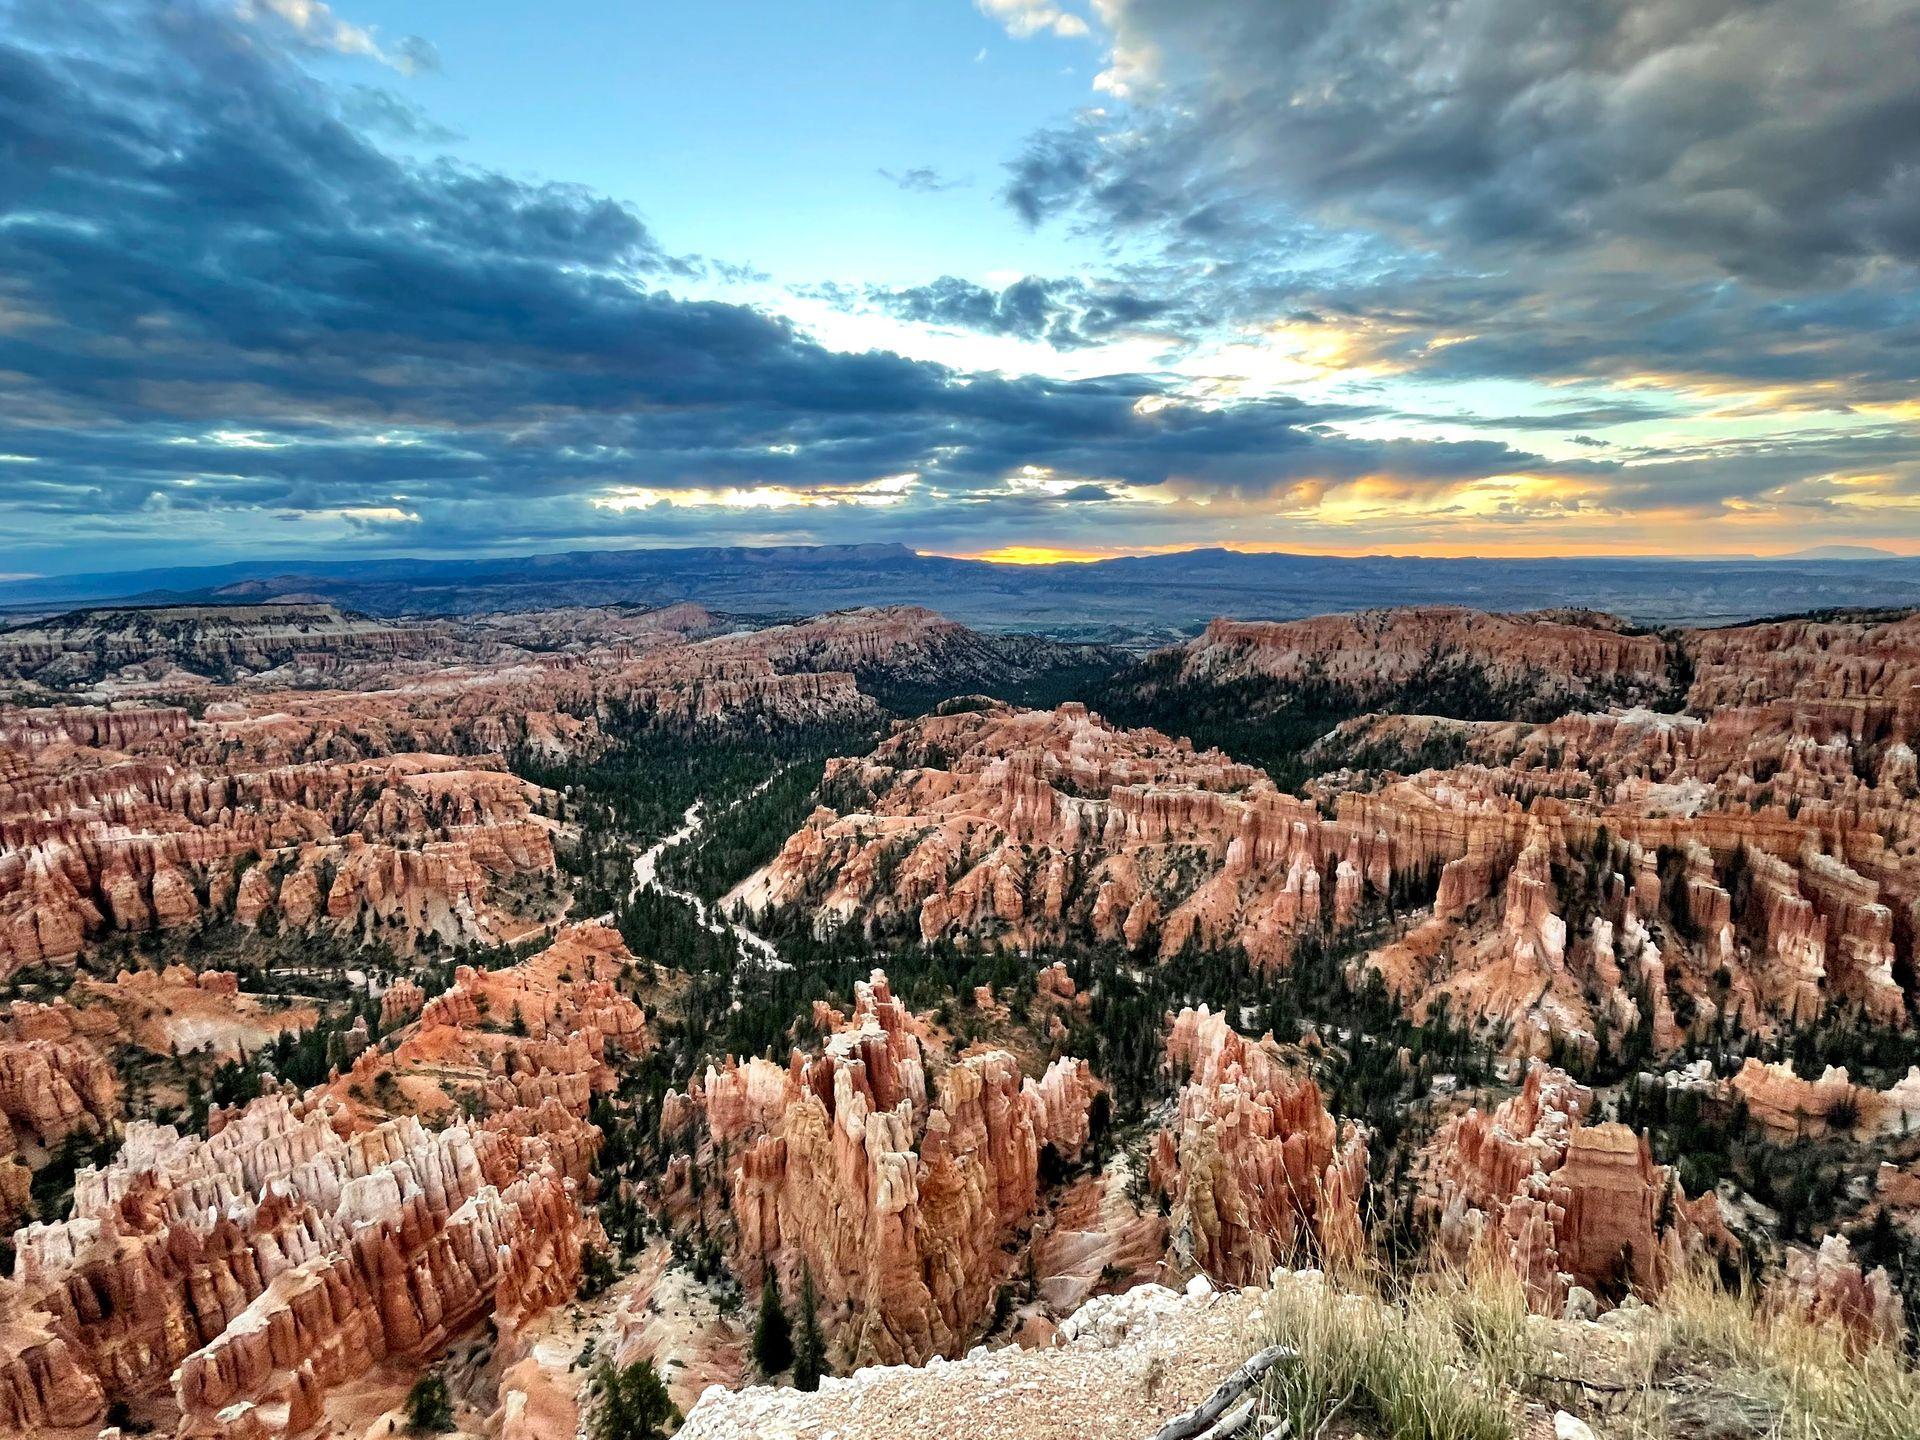 A view of Bryce Canyon at sunrise.